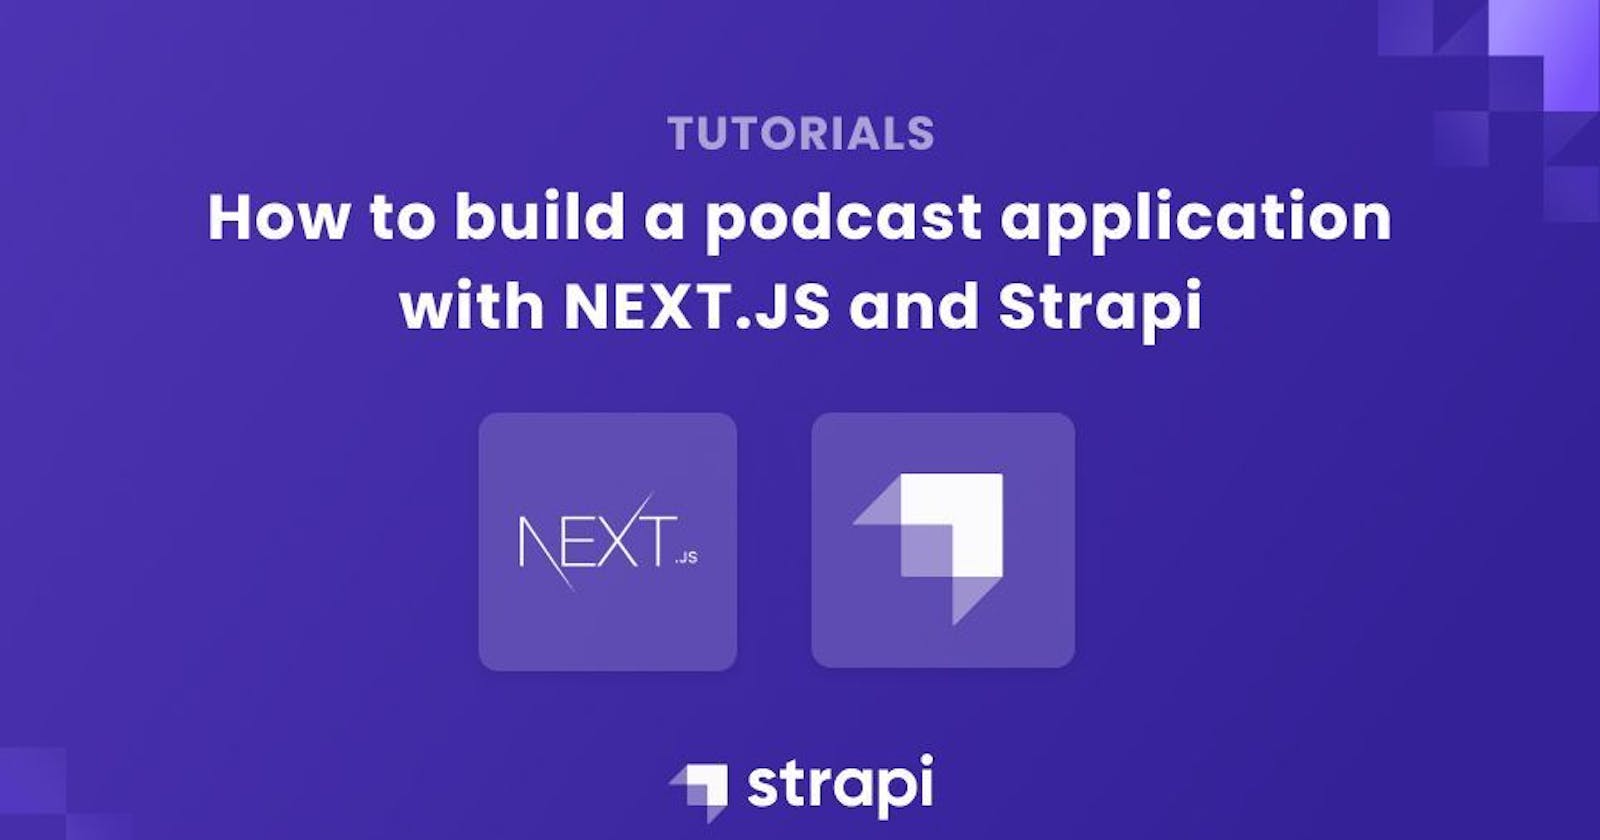 How to Build a Podcast App with Next.js and Strapi